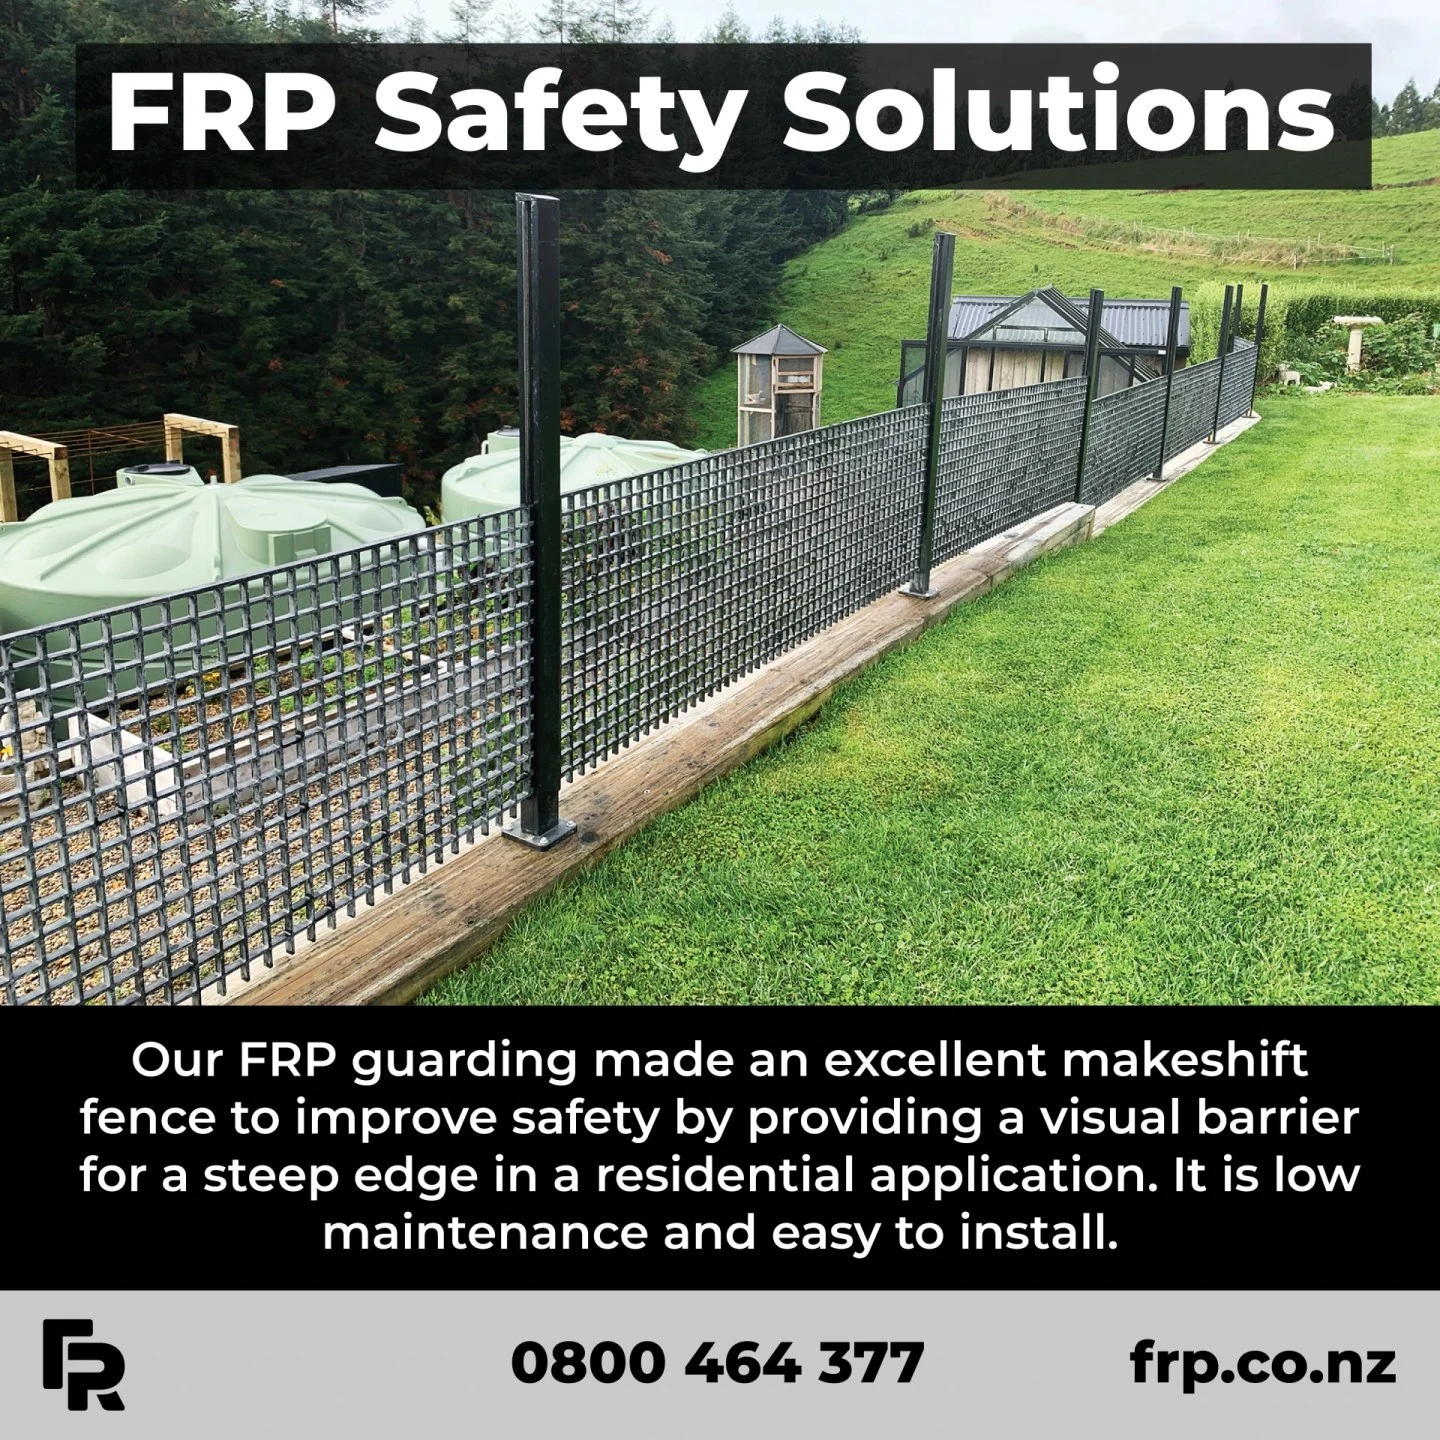 Get your outdoor space ready for summer!

#frp #frpproducts #guarding #gardens #residential #diyprojects #nzarchitects #fencing